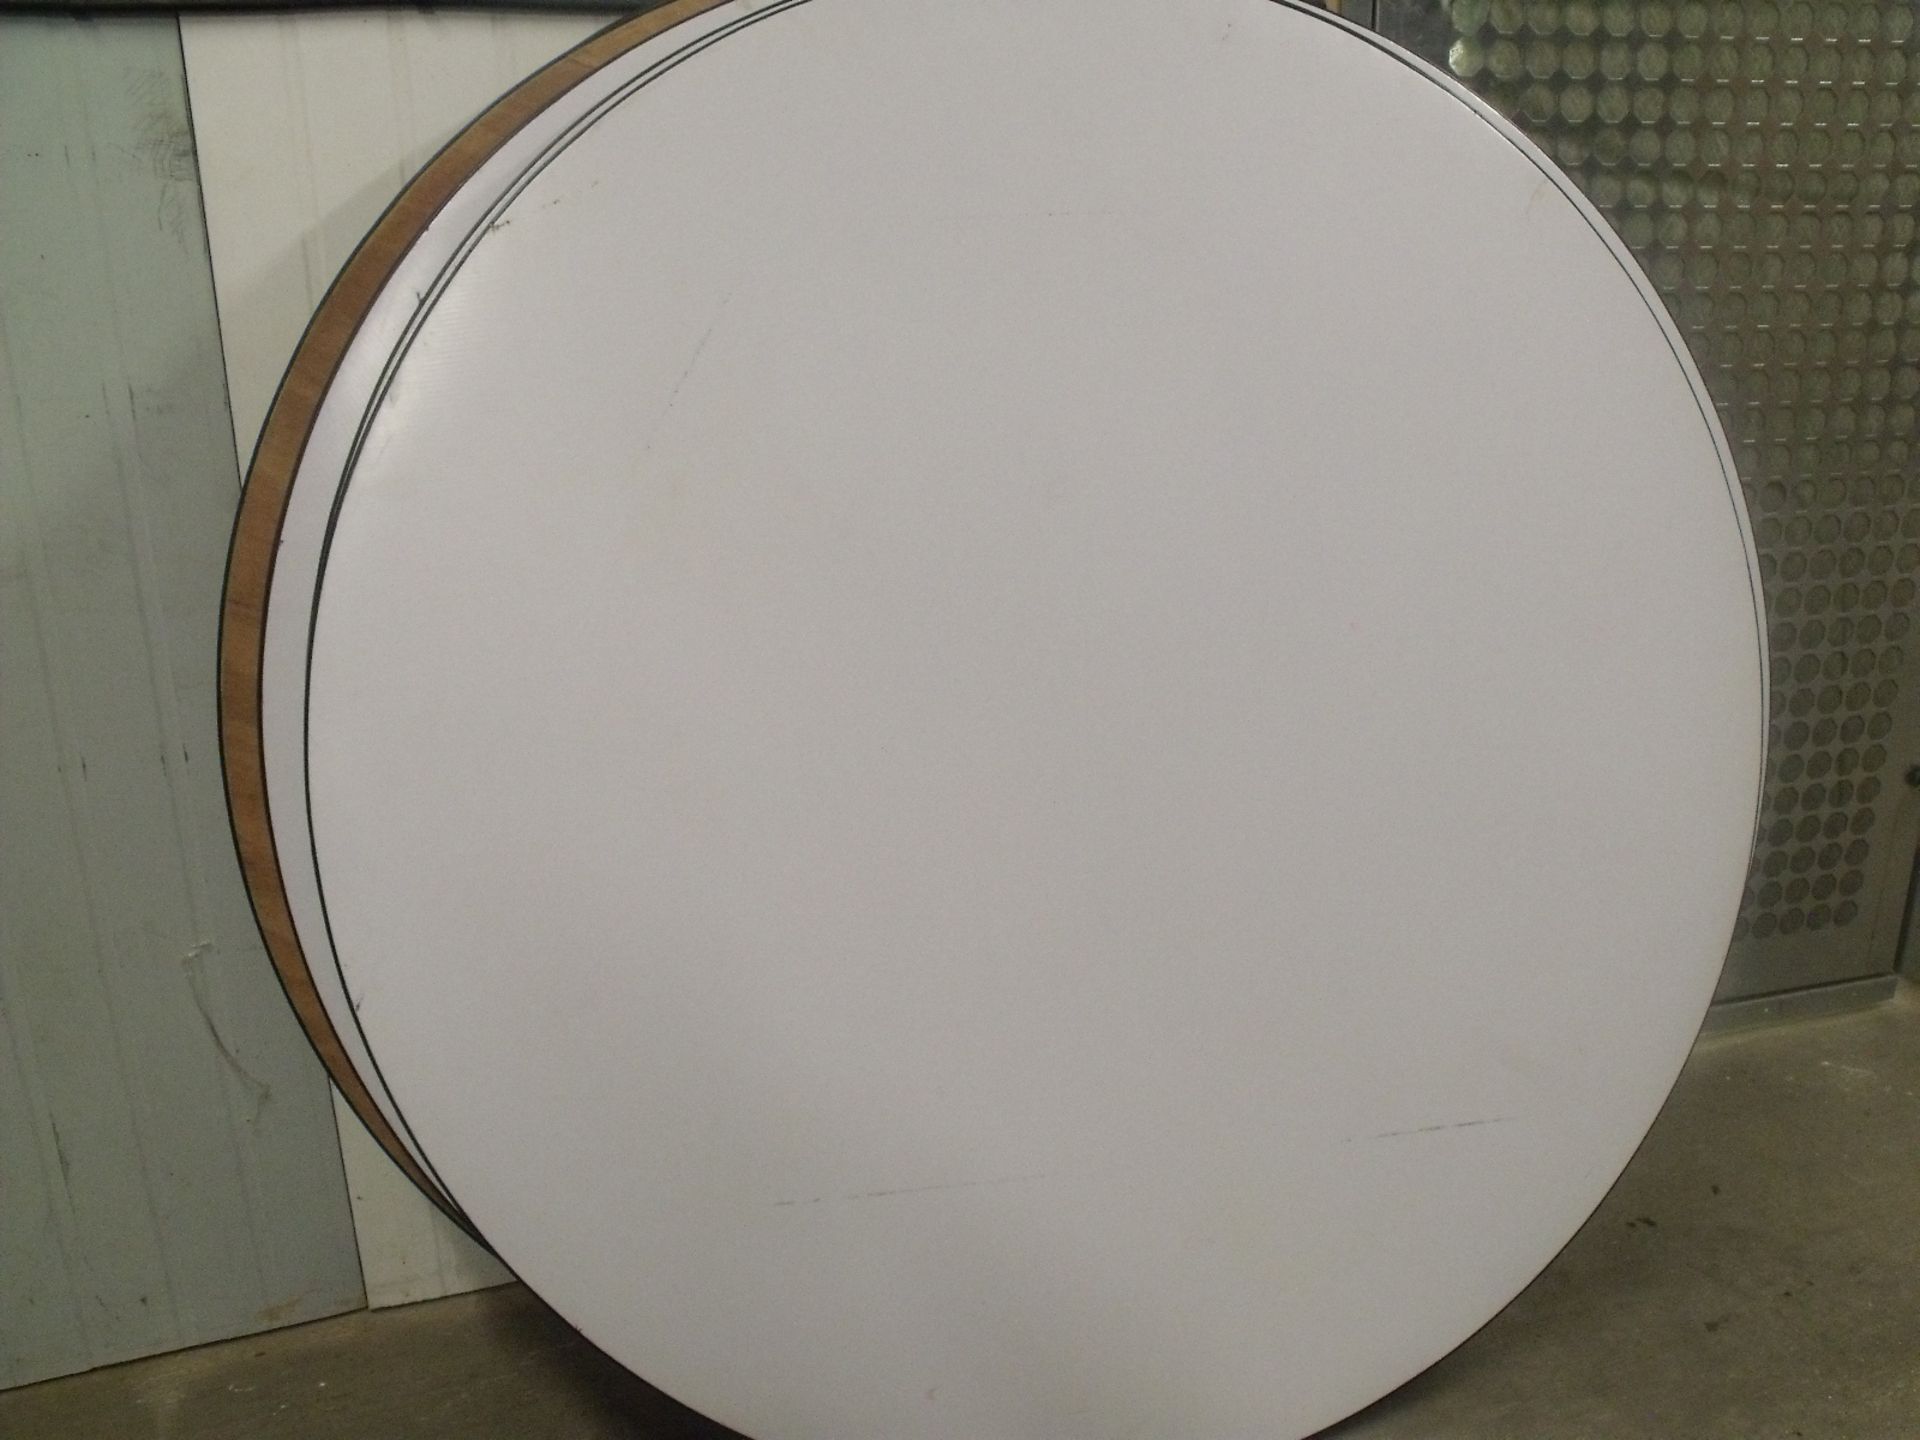 5 x 5ft round padded banqueting table tops only - Image 2 of 2